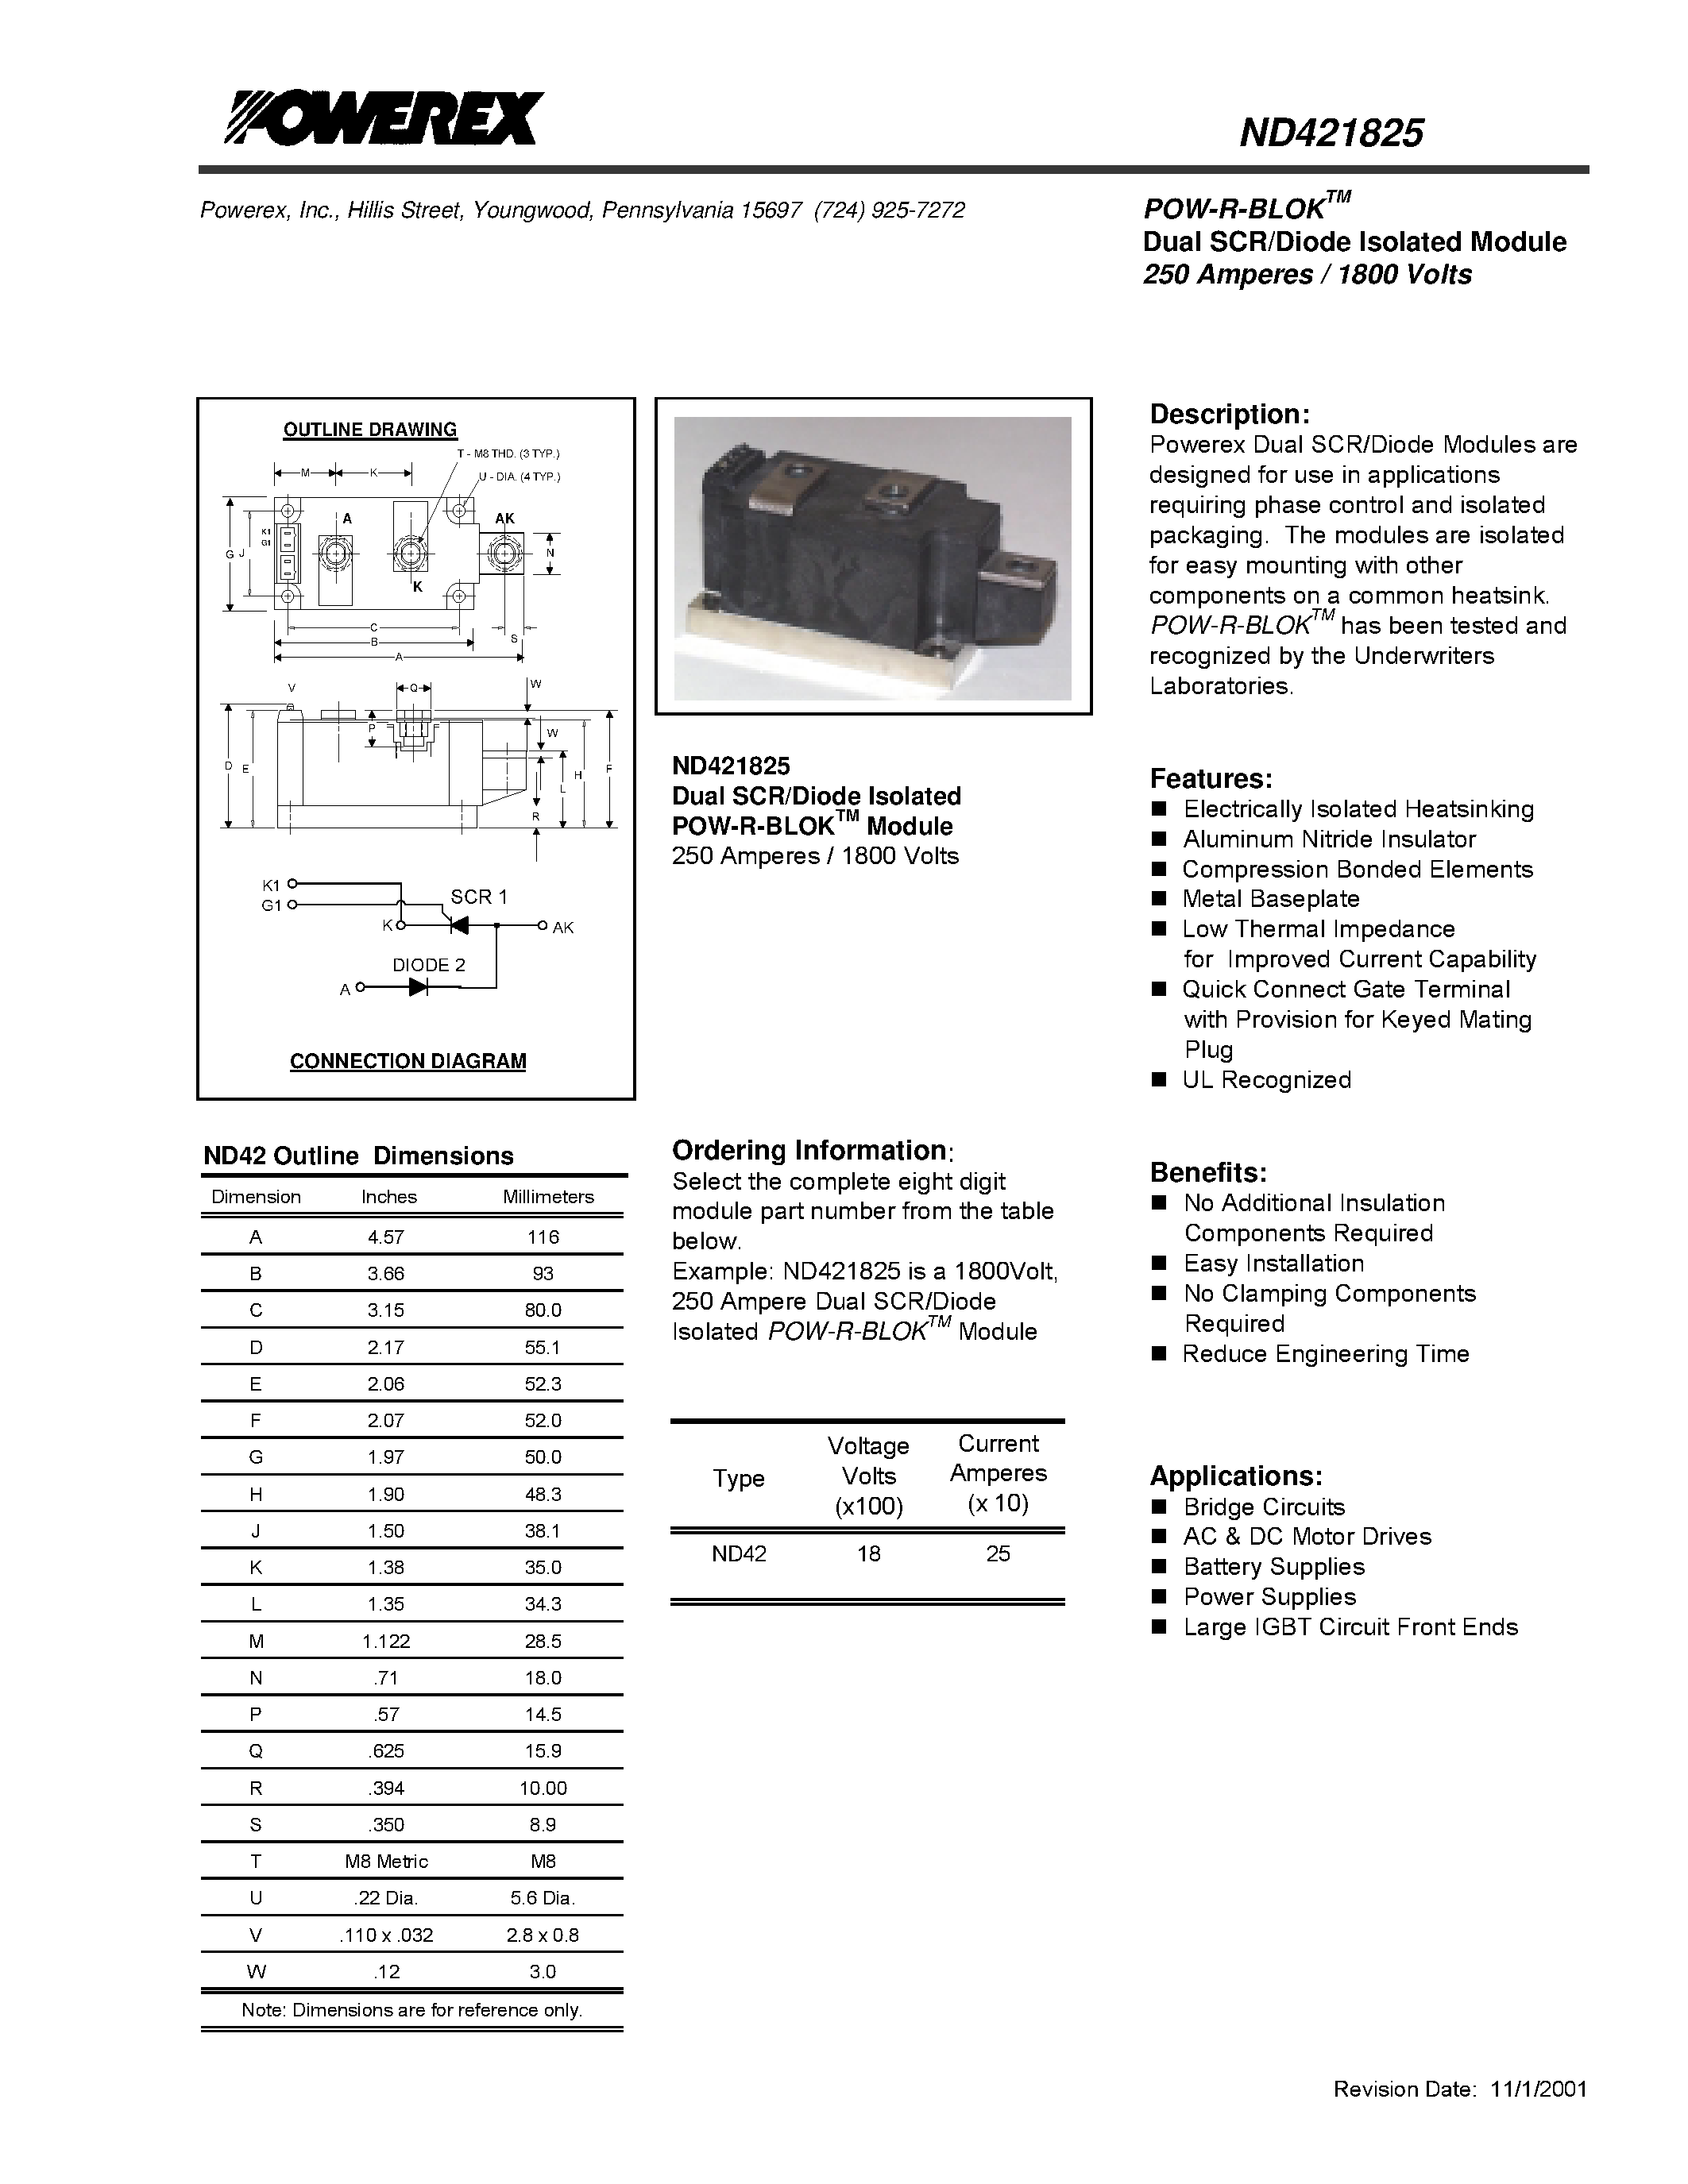 Datasheet ND421825 - POW-R-BLOK Dual SCR/Diode Isolated Module (250 Amperes / 1800 Volts) page 1